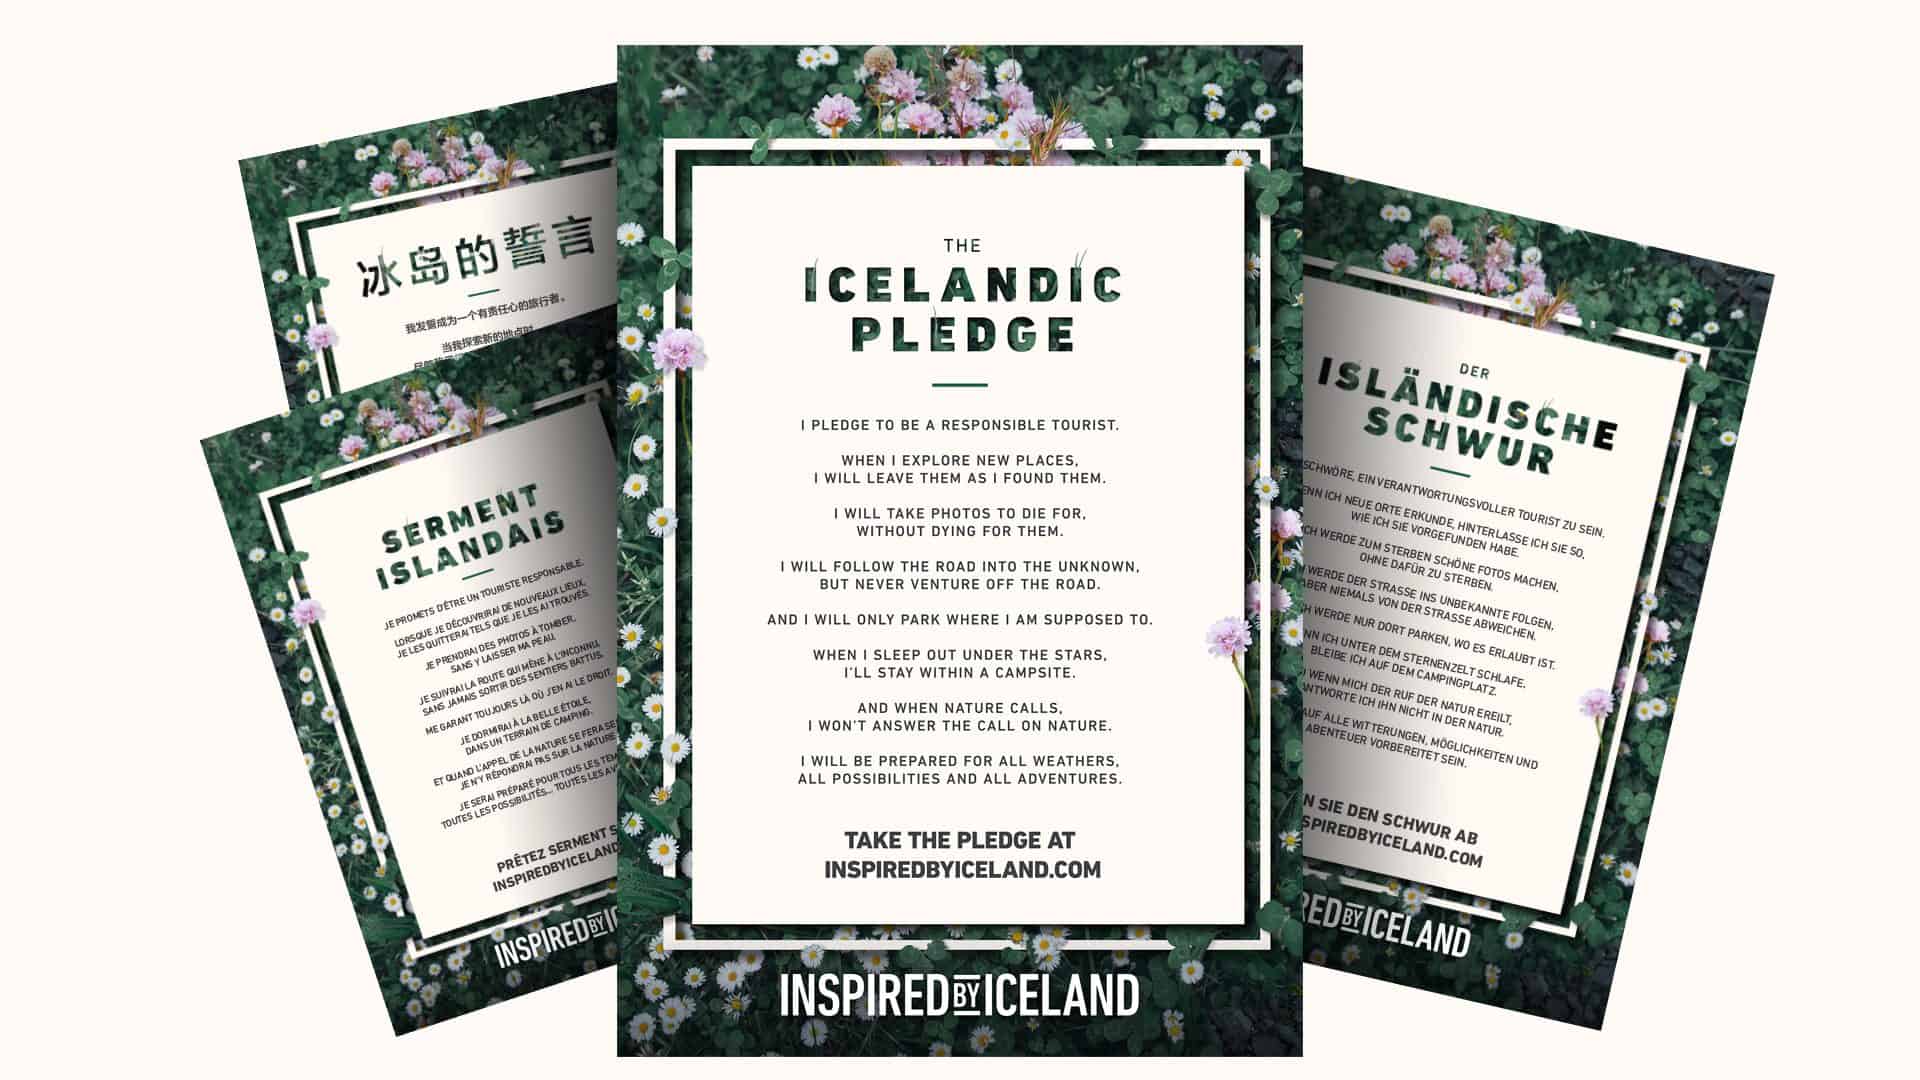 The Pledge in Iceland